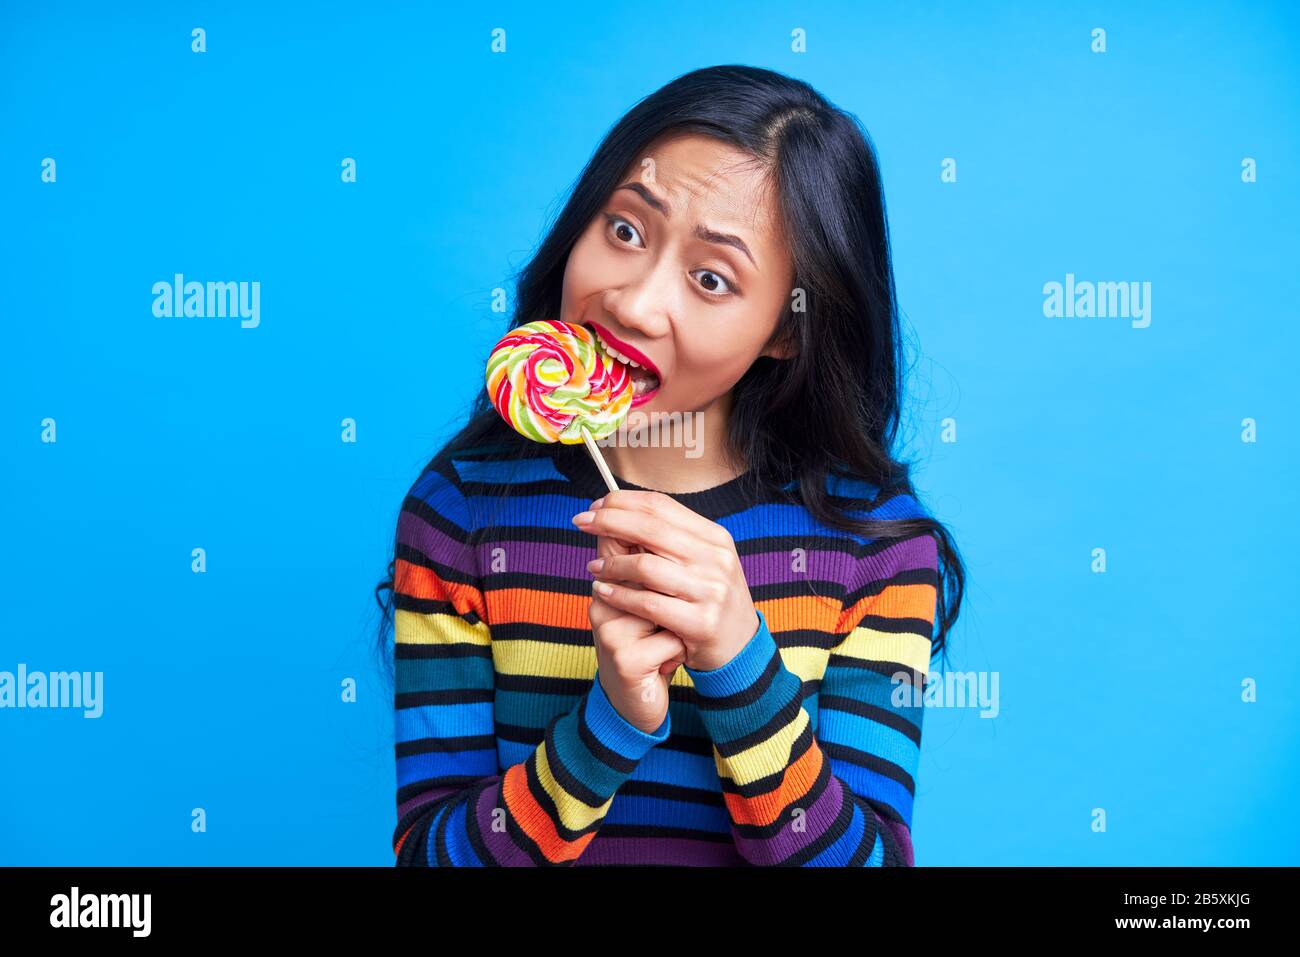 Hungry funny woman bite delicious colorful lollipop isolated  on blue background. Yummy, emotion concept, sweet food, diet Stock Photo